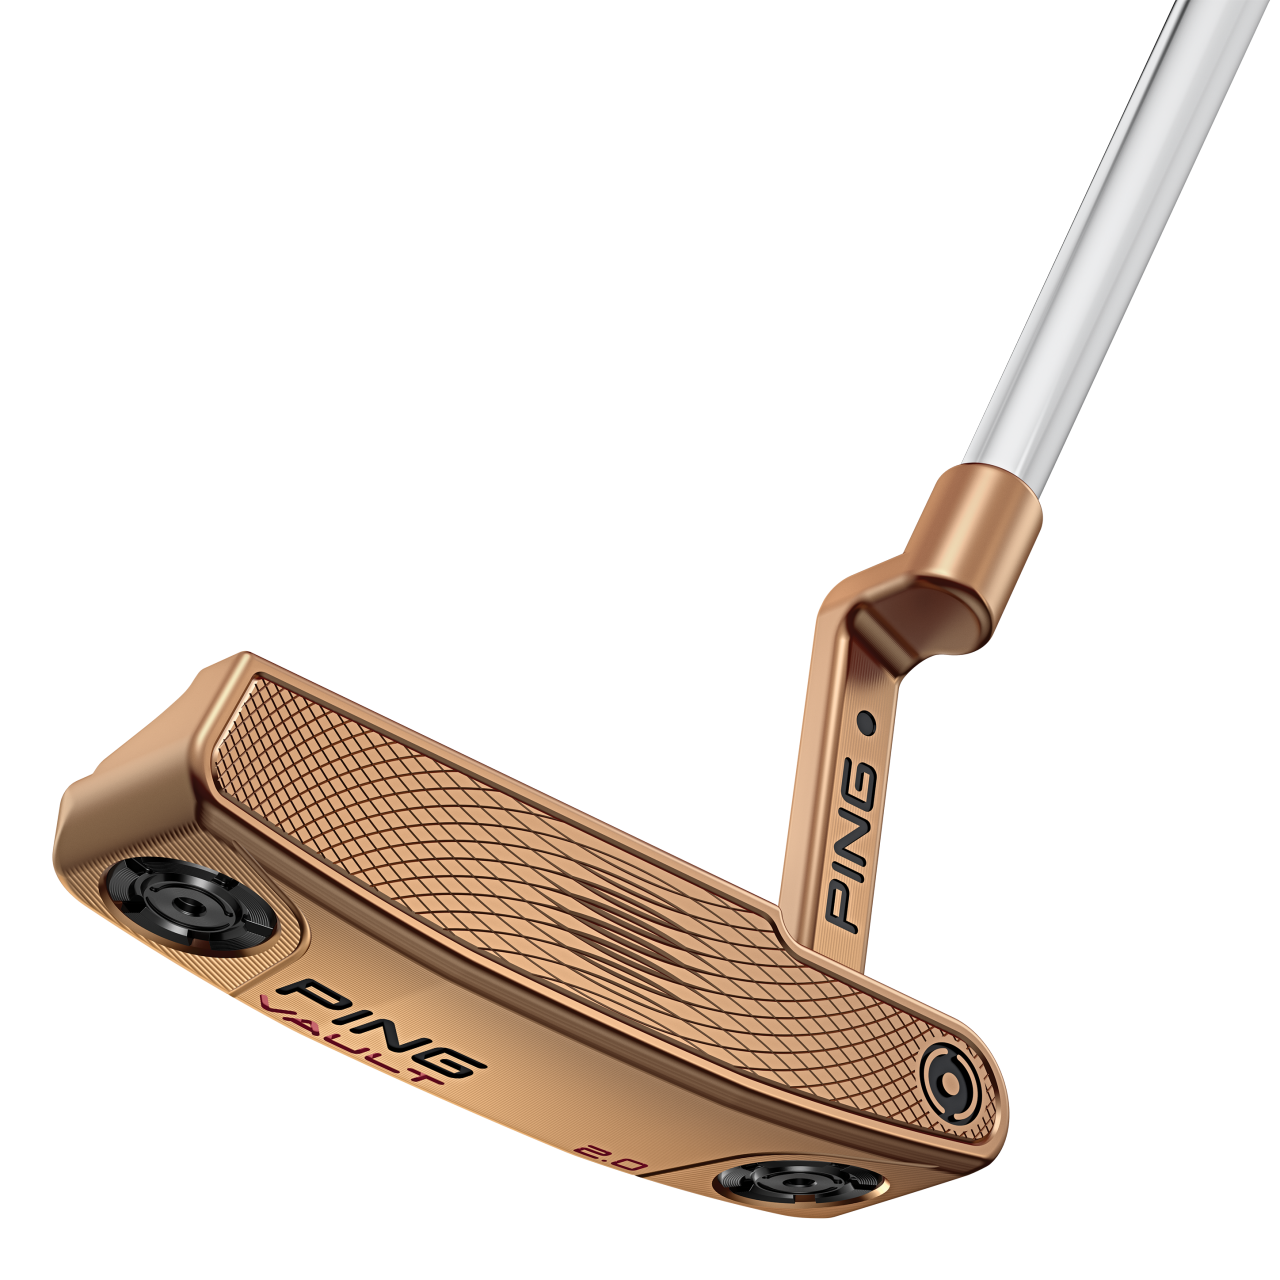 Ping debuts new putters, wedges | Golf Equipment: Clubs, Balls, Bags